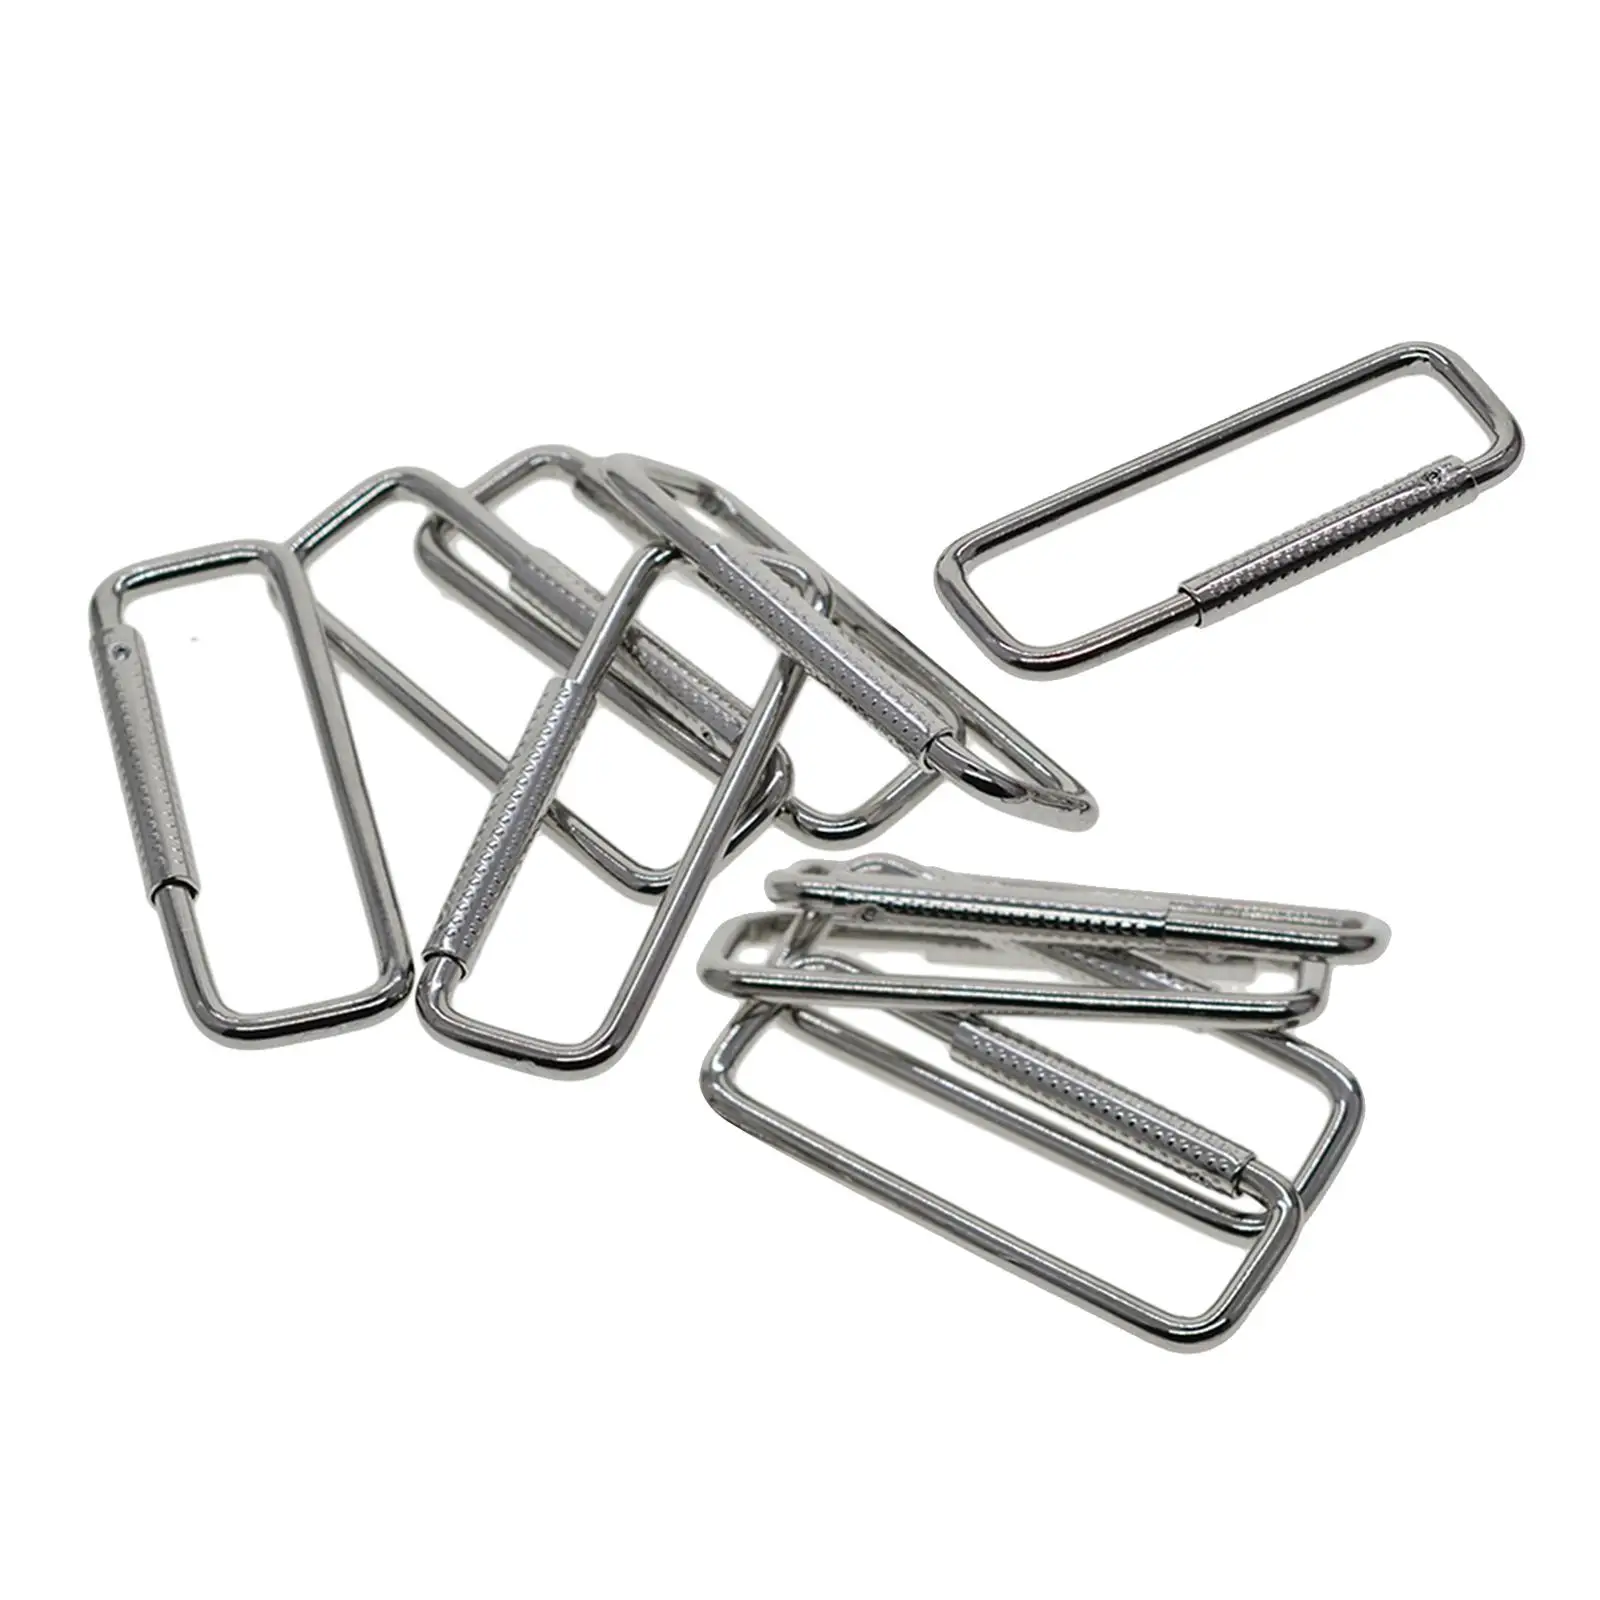 10x Rectangle Carabiner Clips Metal Durable Multipurpose Sturdy DIY Keychain Clips for Bags Backpack Outdoor Indoor Dog Tags